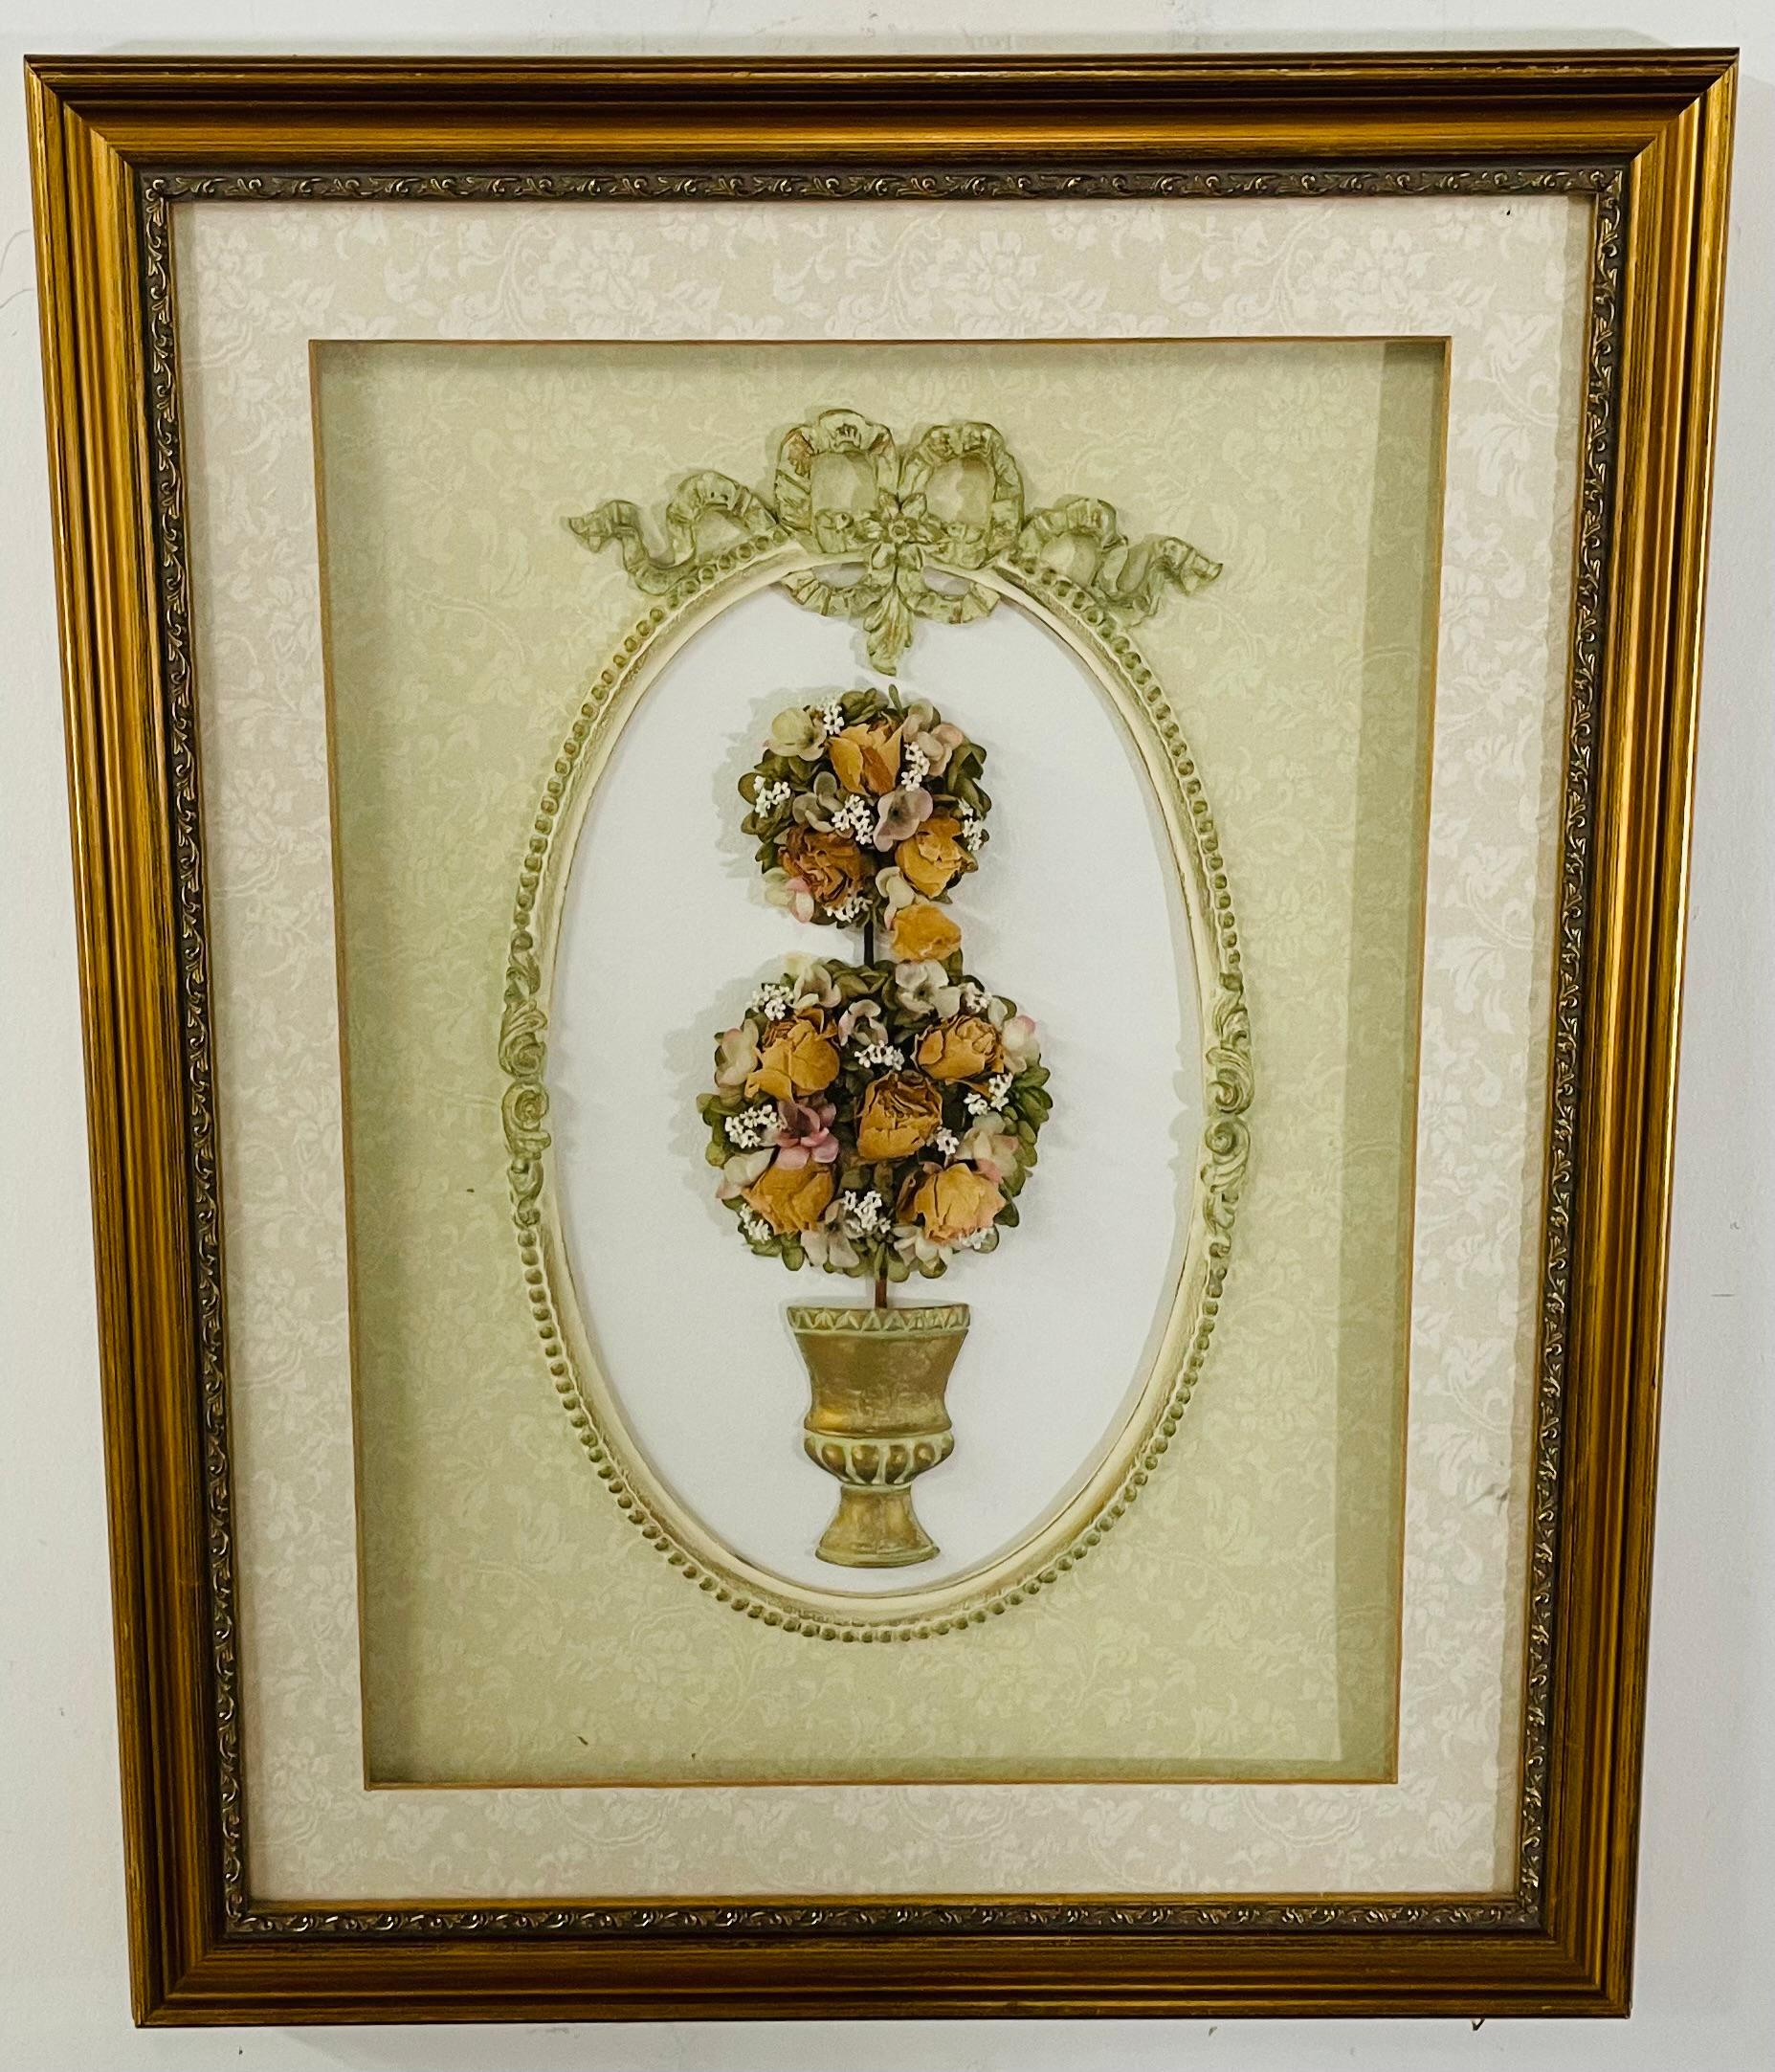 A lovely collage classic French style wall art, featuring a flower bouquet in a large vase or jardiniere presented in oval shaped surface with ribbon and bow decor in green. This art piece will look great in your bedroom, hallway bathroom and will